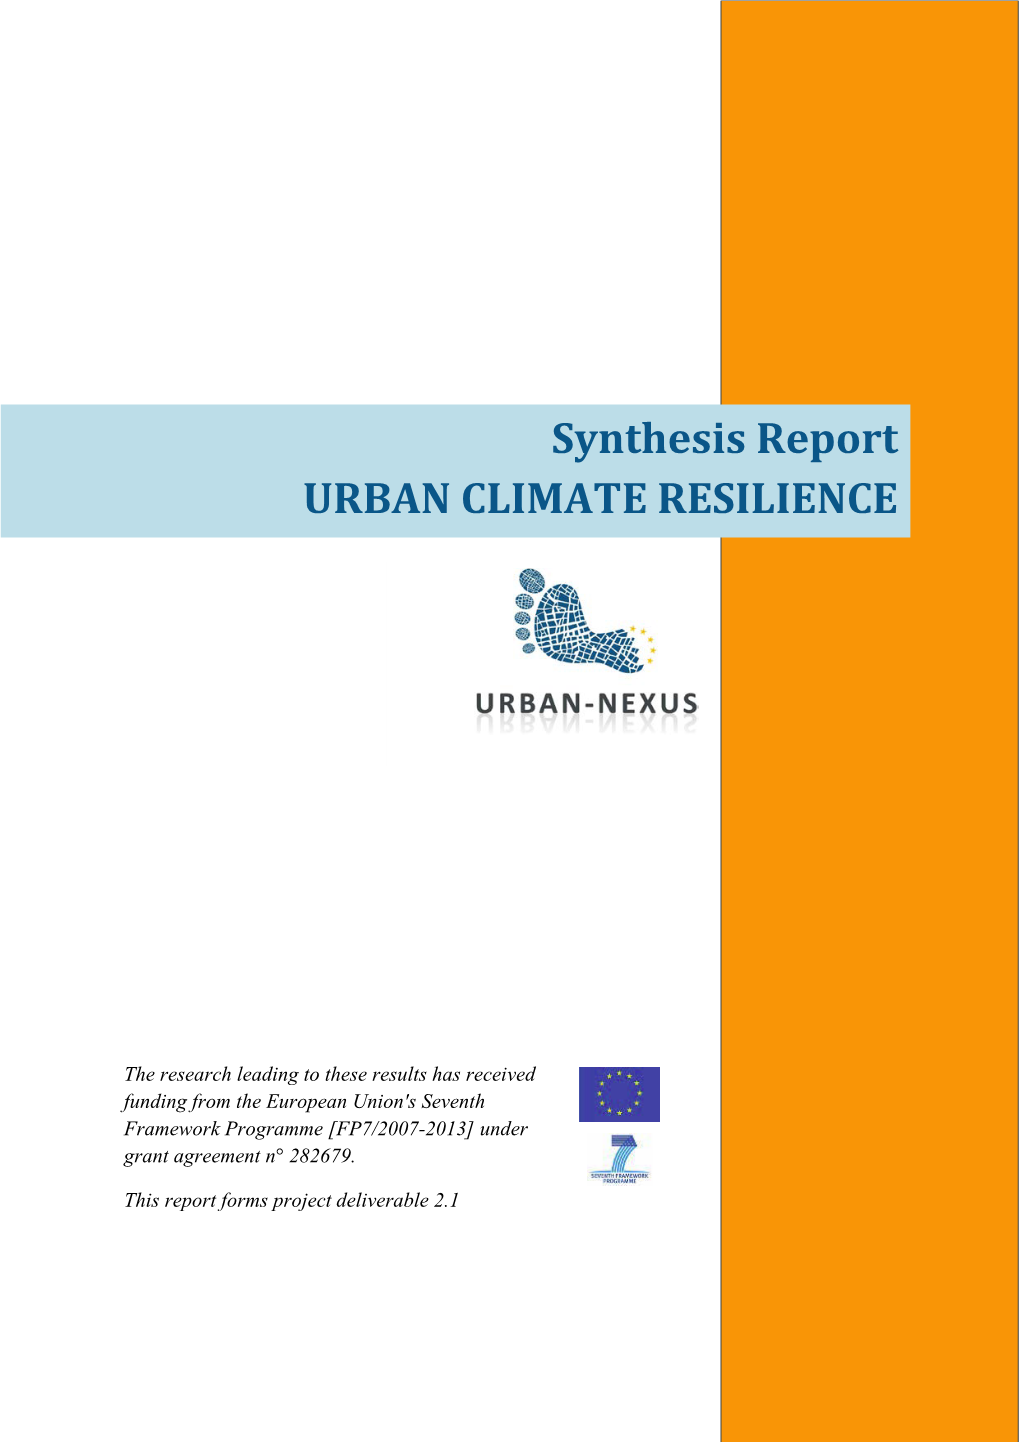 Synthesis Report URBAN CLIMATE RESILIENCE, Urban-Nexus